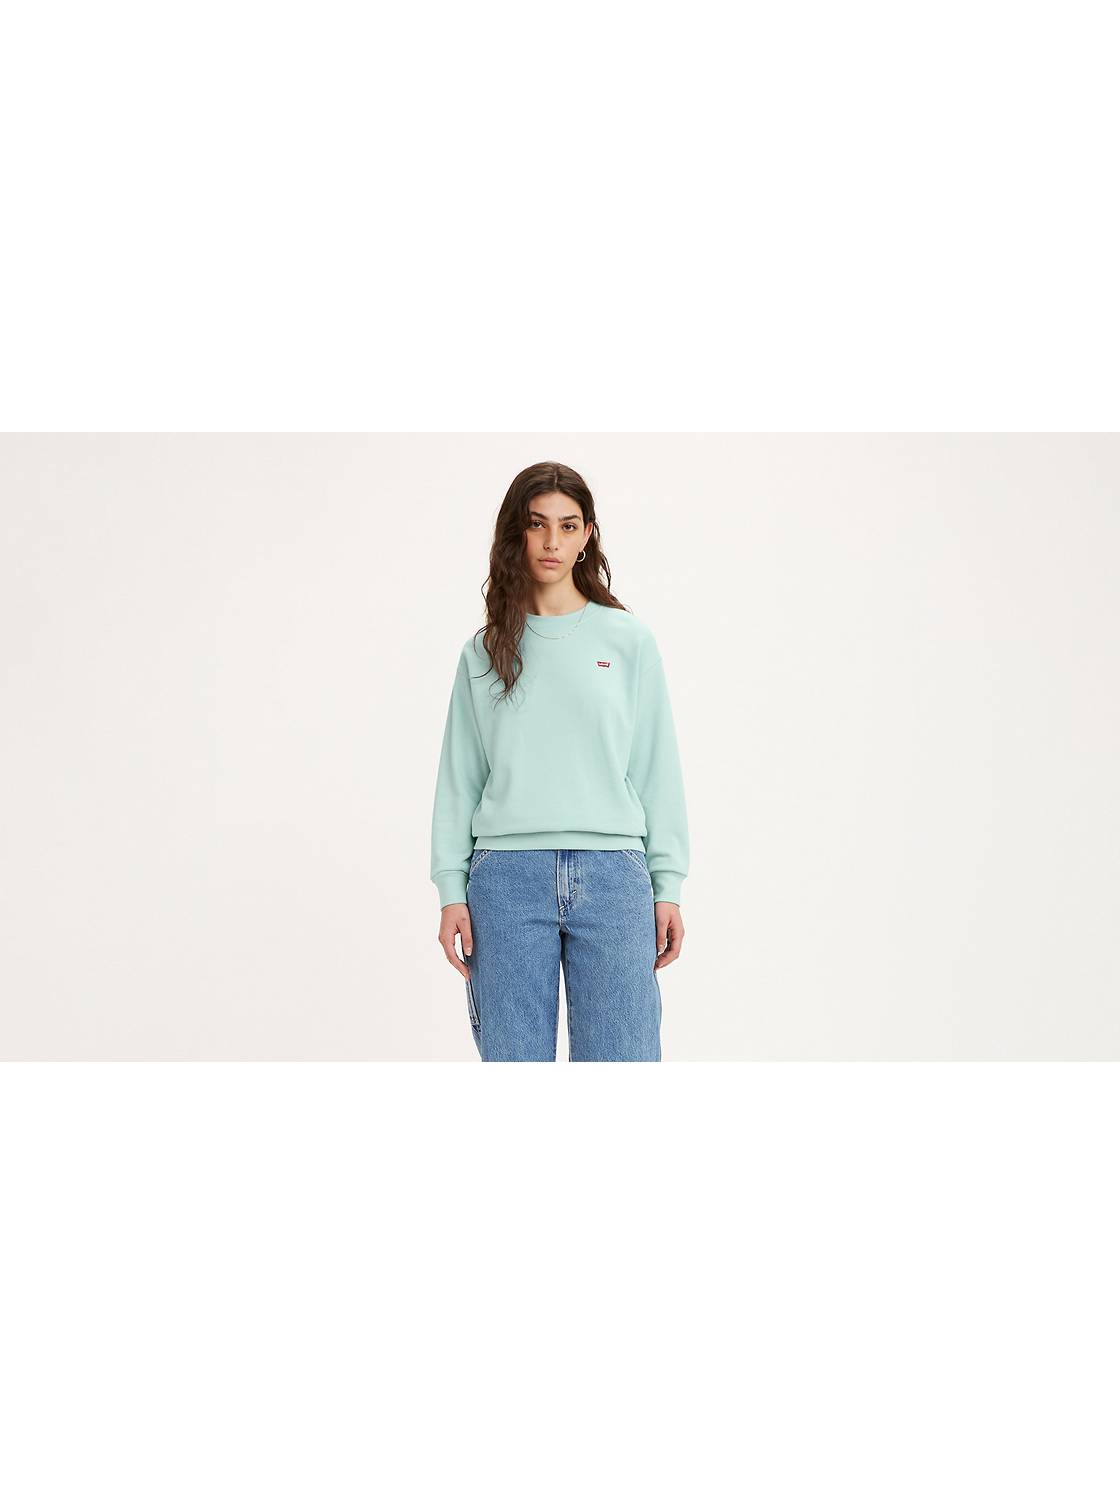 Sudaderas De Mujer Sin Capucha,Sudadera Cropped,Oversized Tshirts Shirts  For Women Cropped,Bonitas Sudaderas,Sudadera Cuello Redondo Mujer,Fall